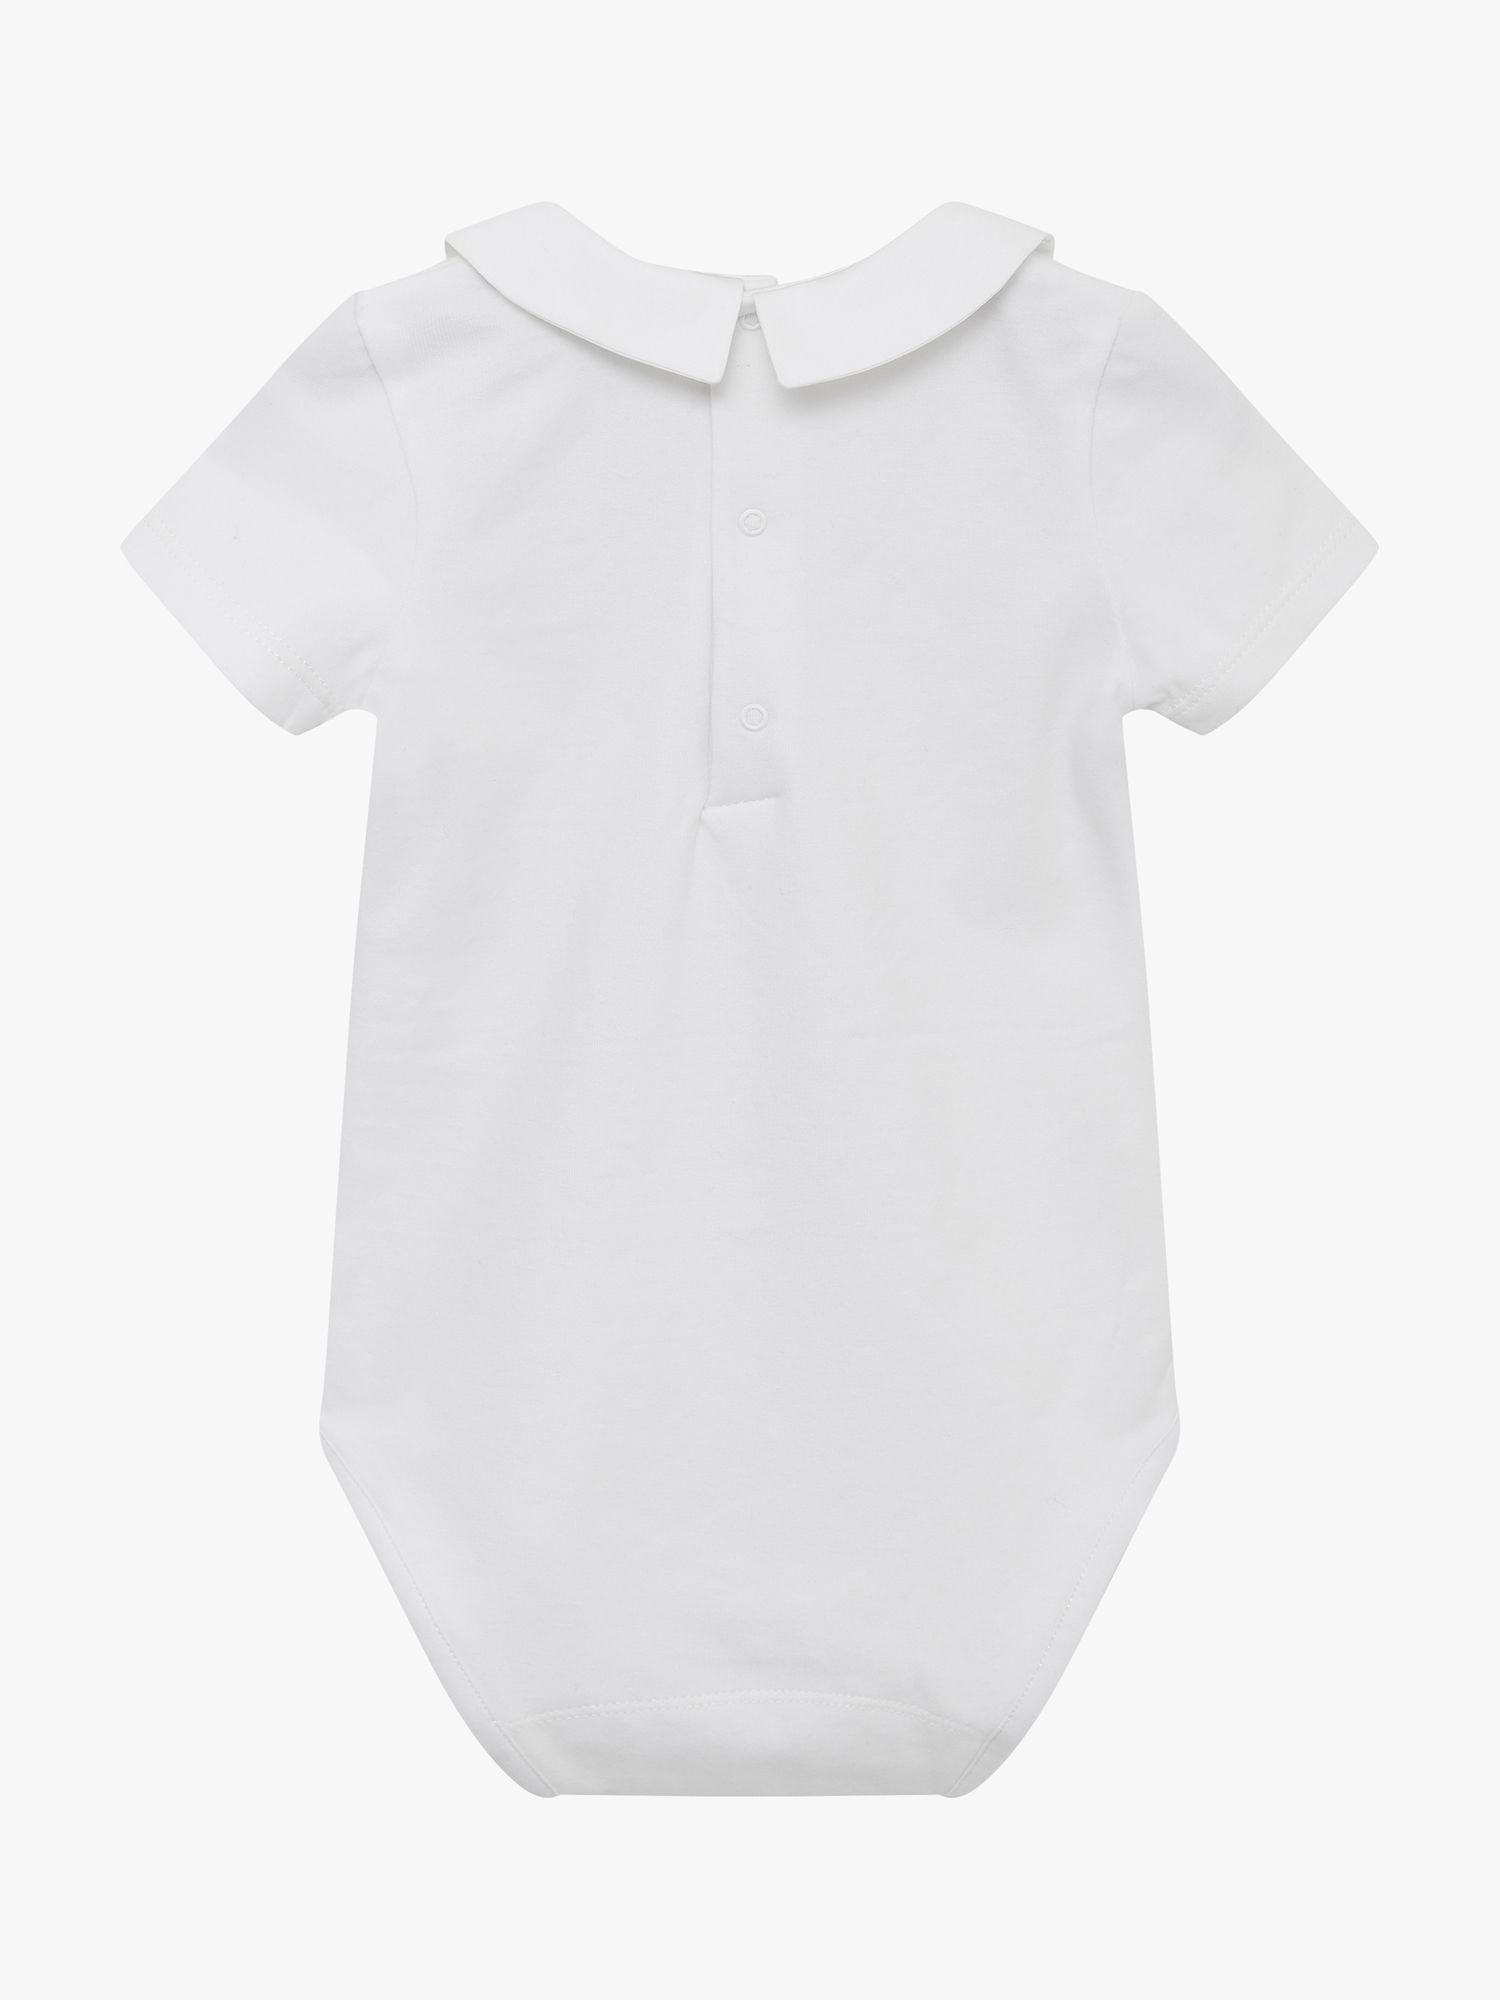 Buy Trotters Thomas Brown Baby Monty Lion Jersey Bodysuit, White Online at johnlewis.com